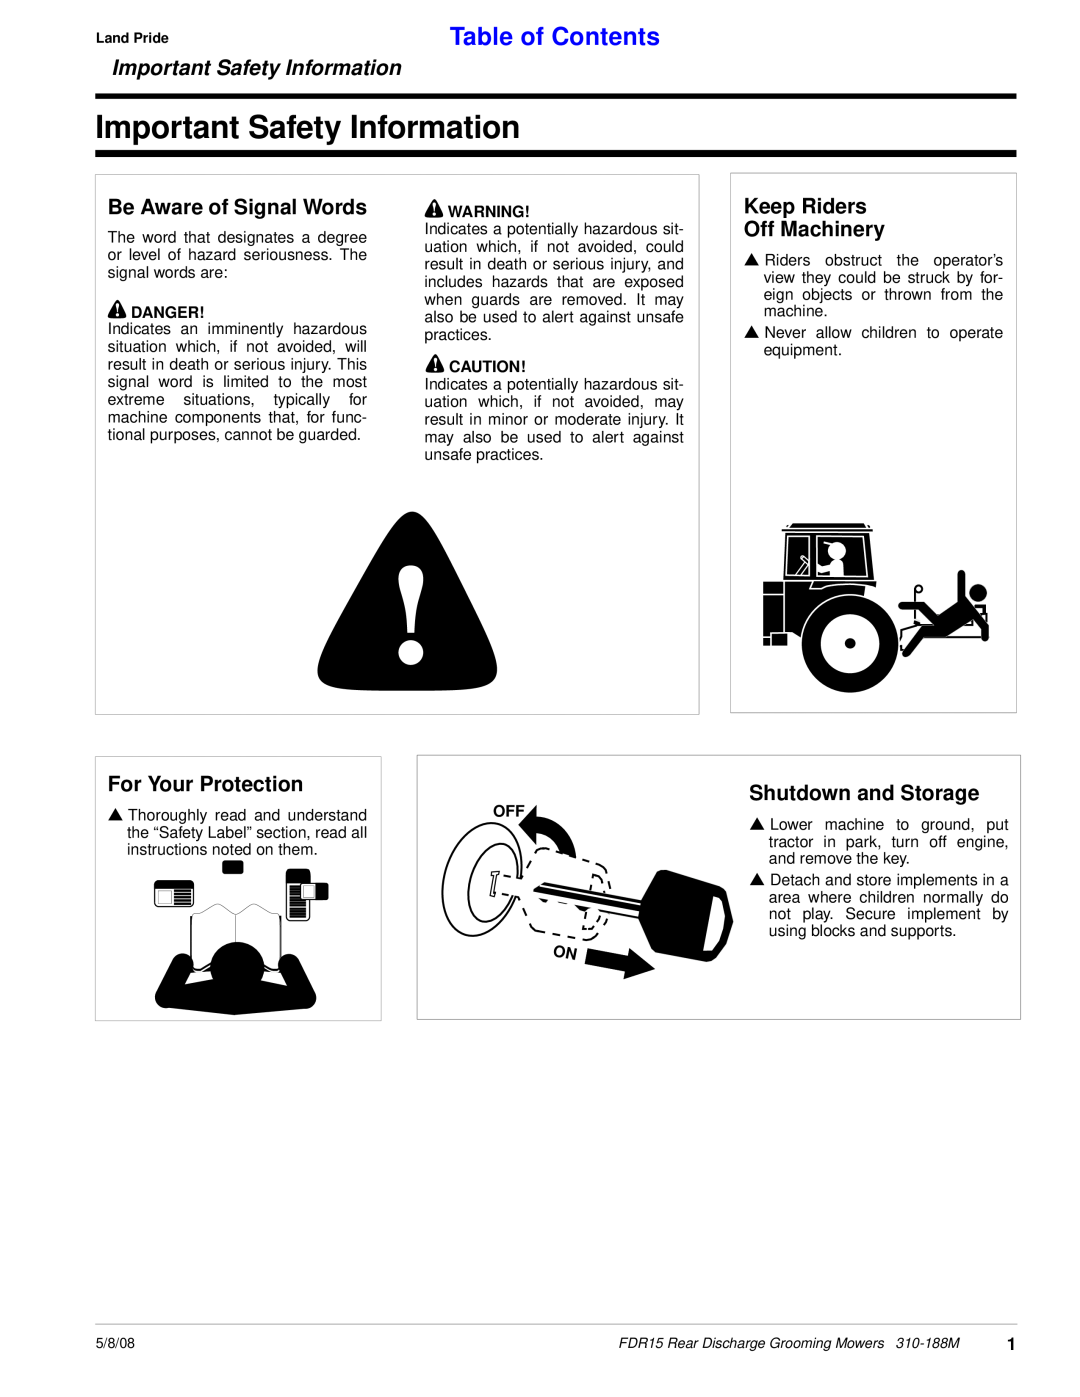 Land Pride FDR15 Important Safety Information, Table of Contents, Be Aware of Signal Words, Keep Riders Off Machinery 